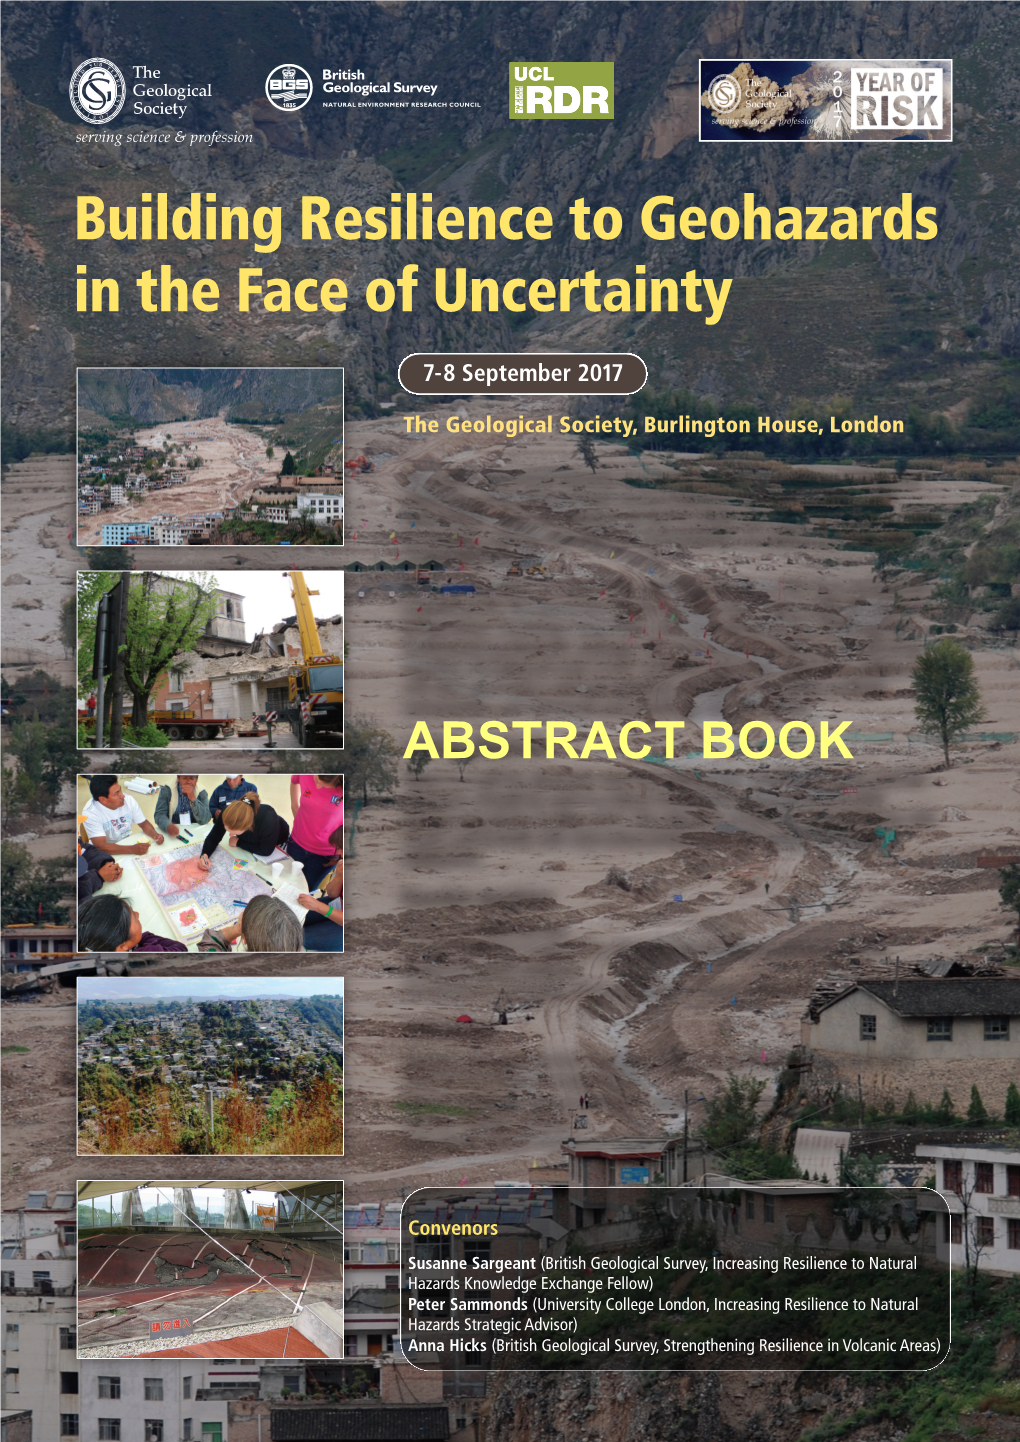 Building Resilience to Geohazards in the Face of Uncertainty